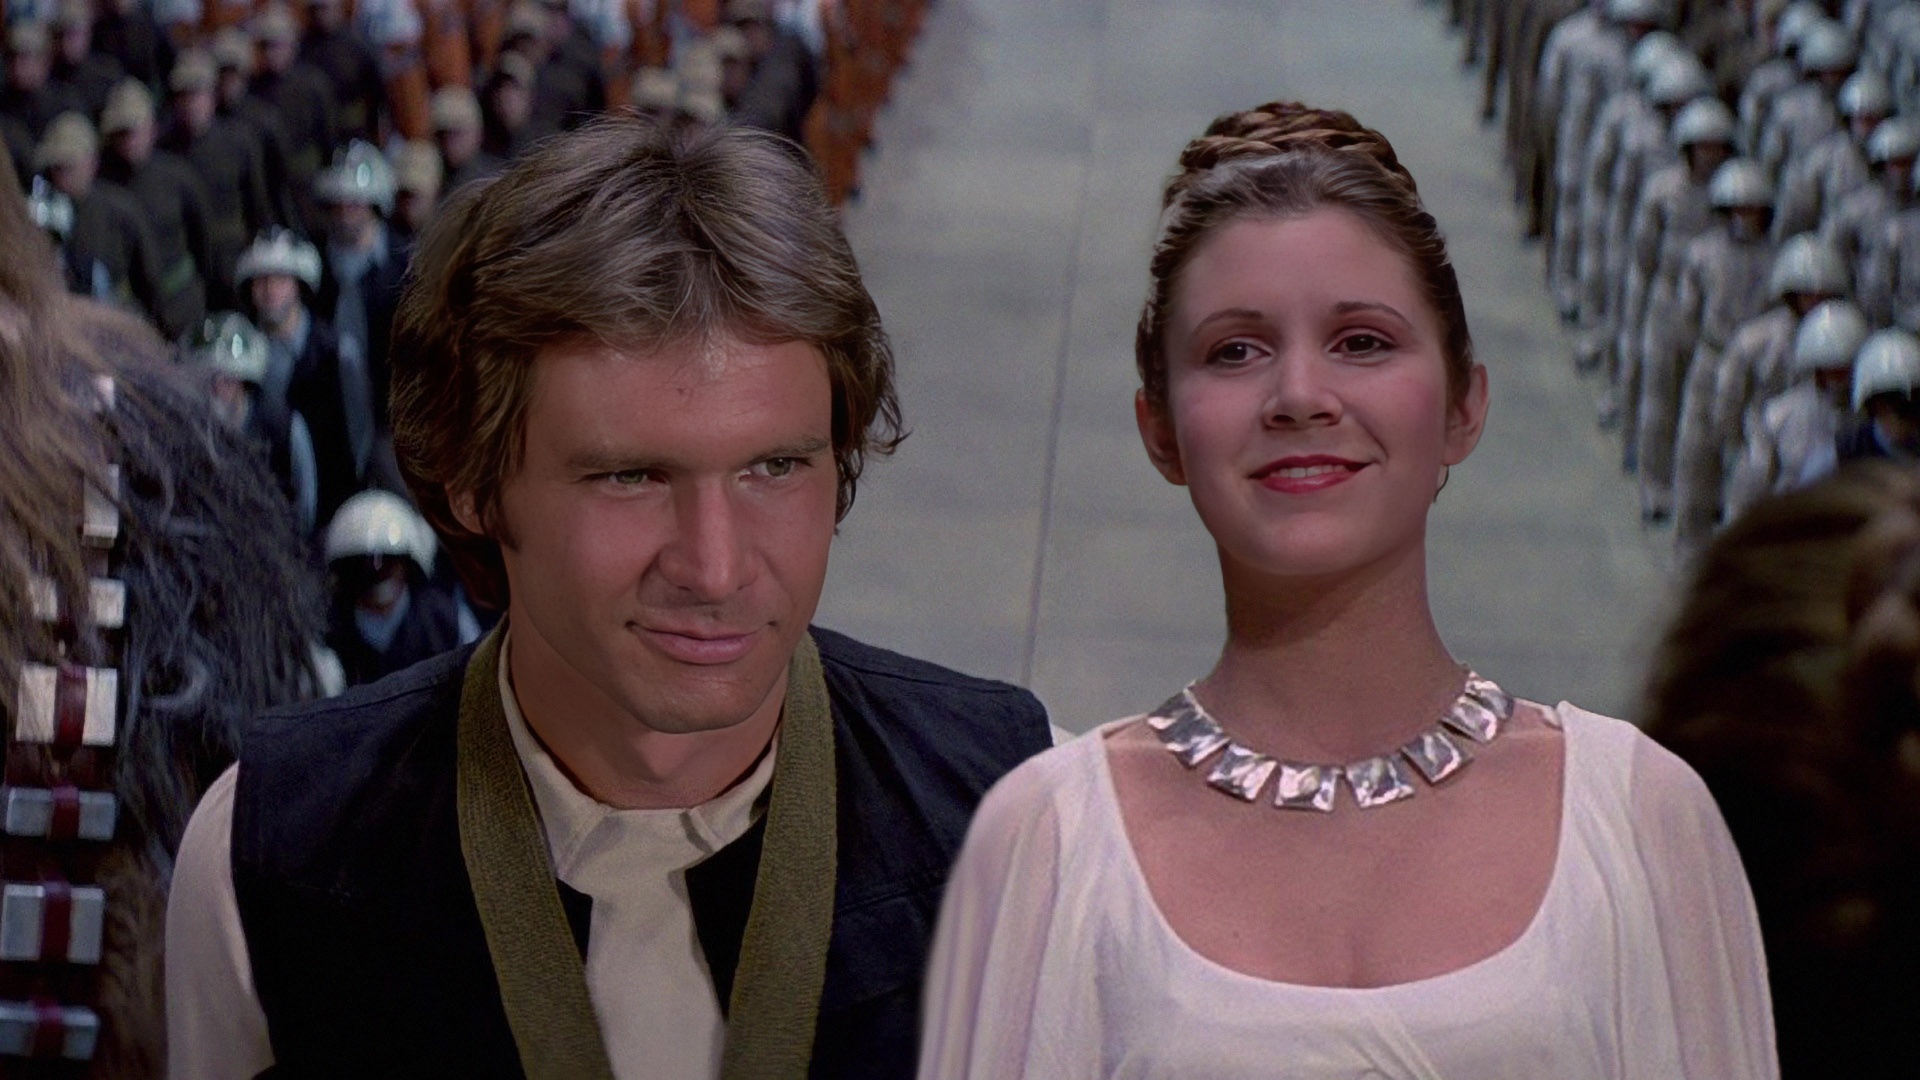 Star Wars' Cast Almost Had a Completely Different Lead, Here's Why It Didn't Happen